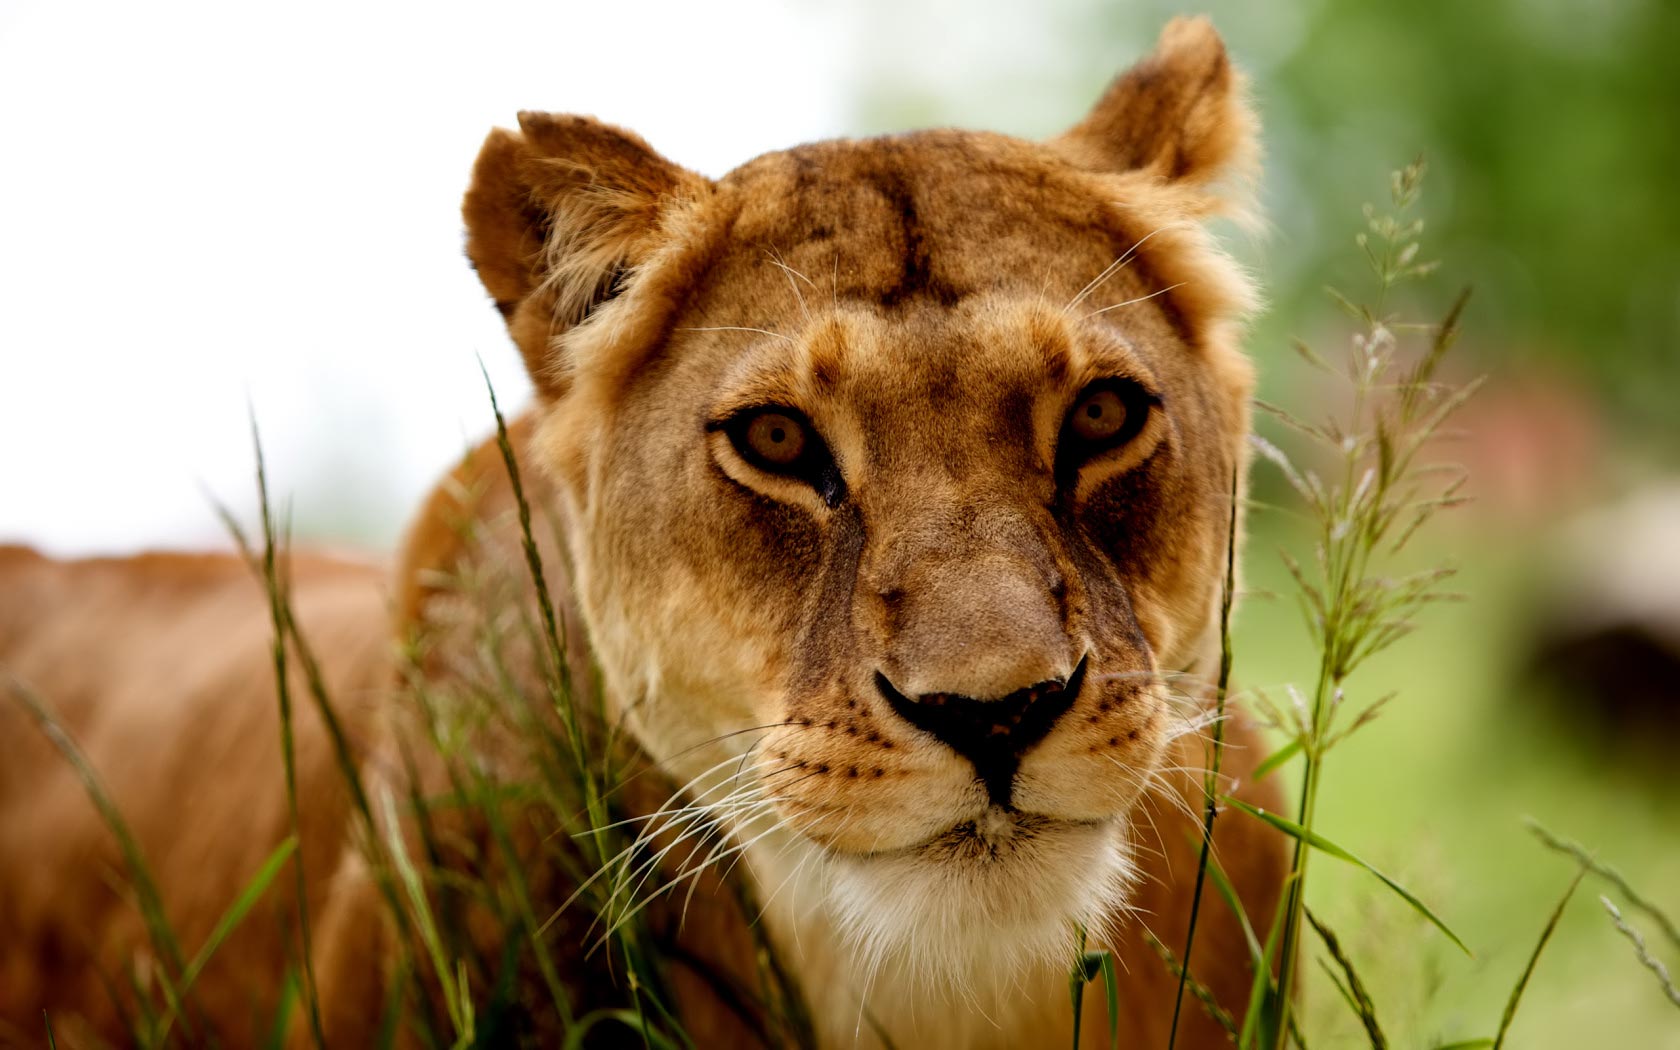 Photo of a lioness in the grass